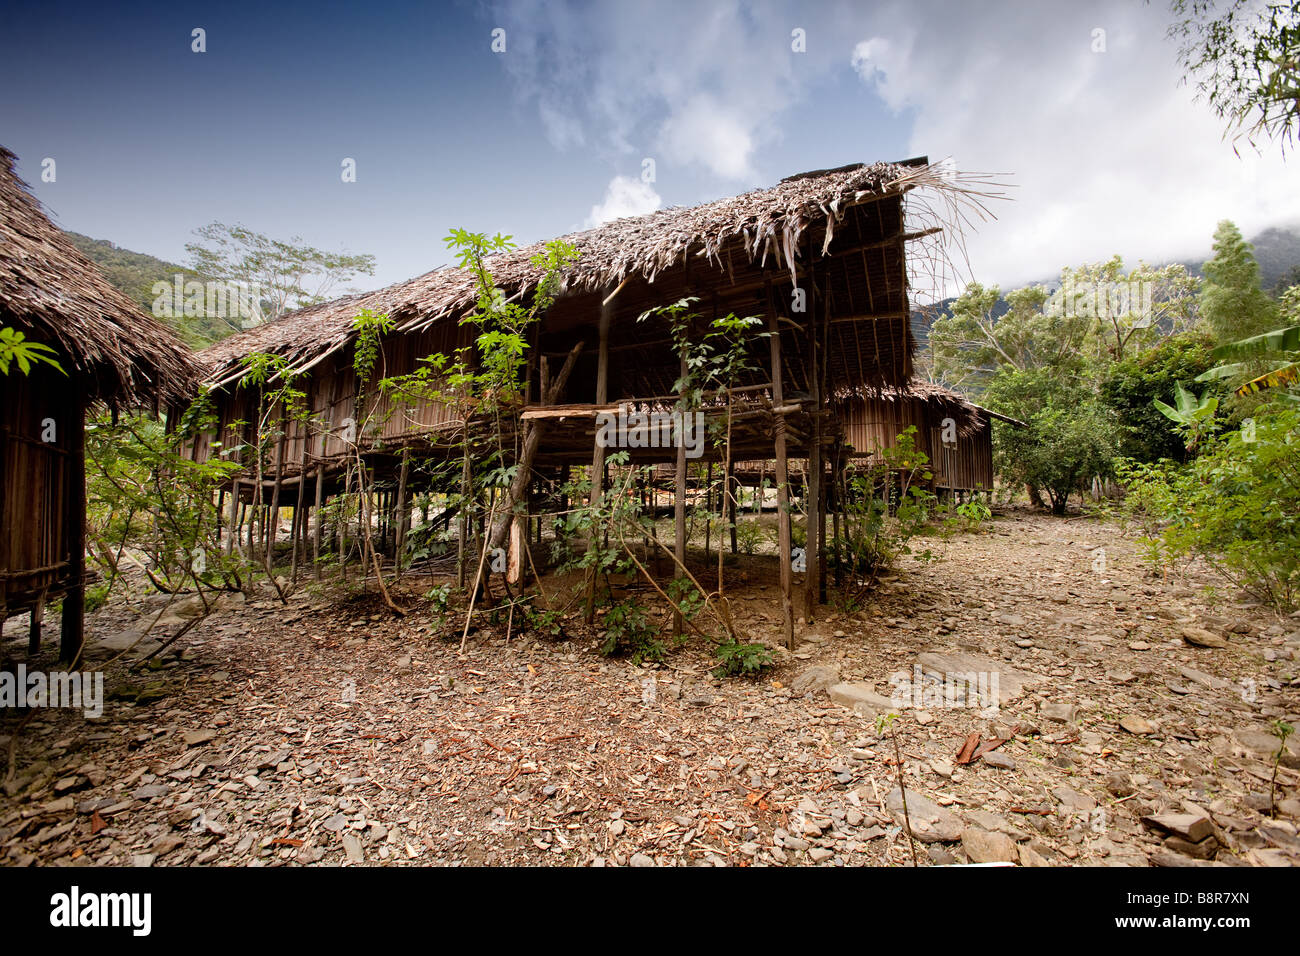 A traditional village hut in Papua Indonesia Stock Photo